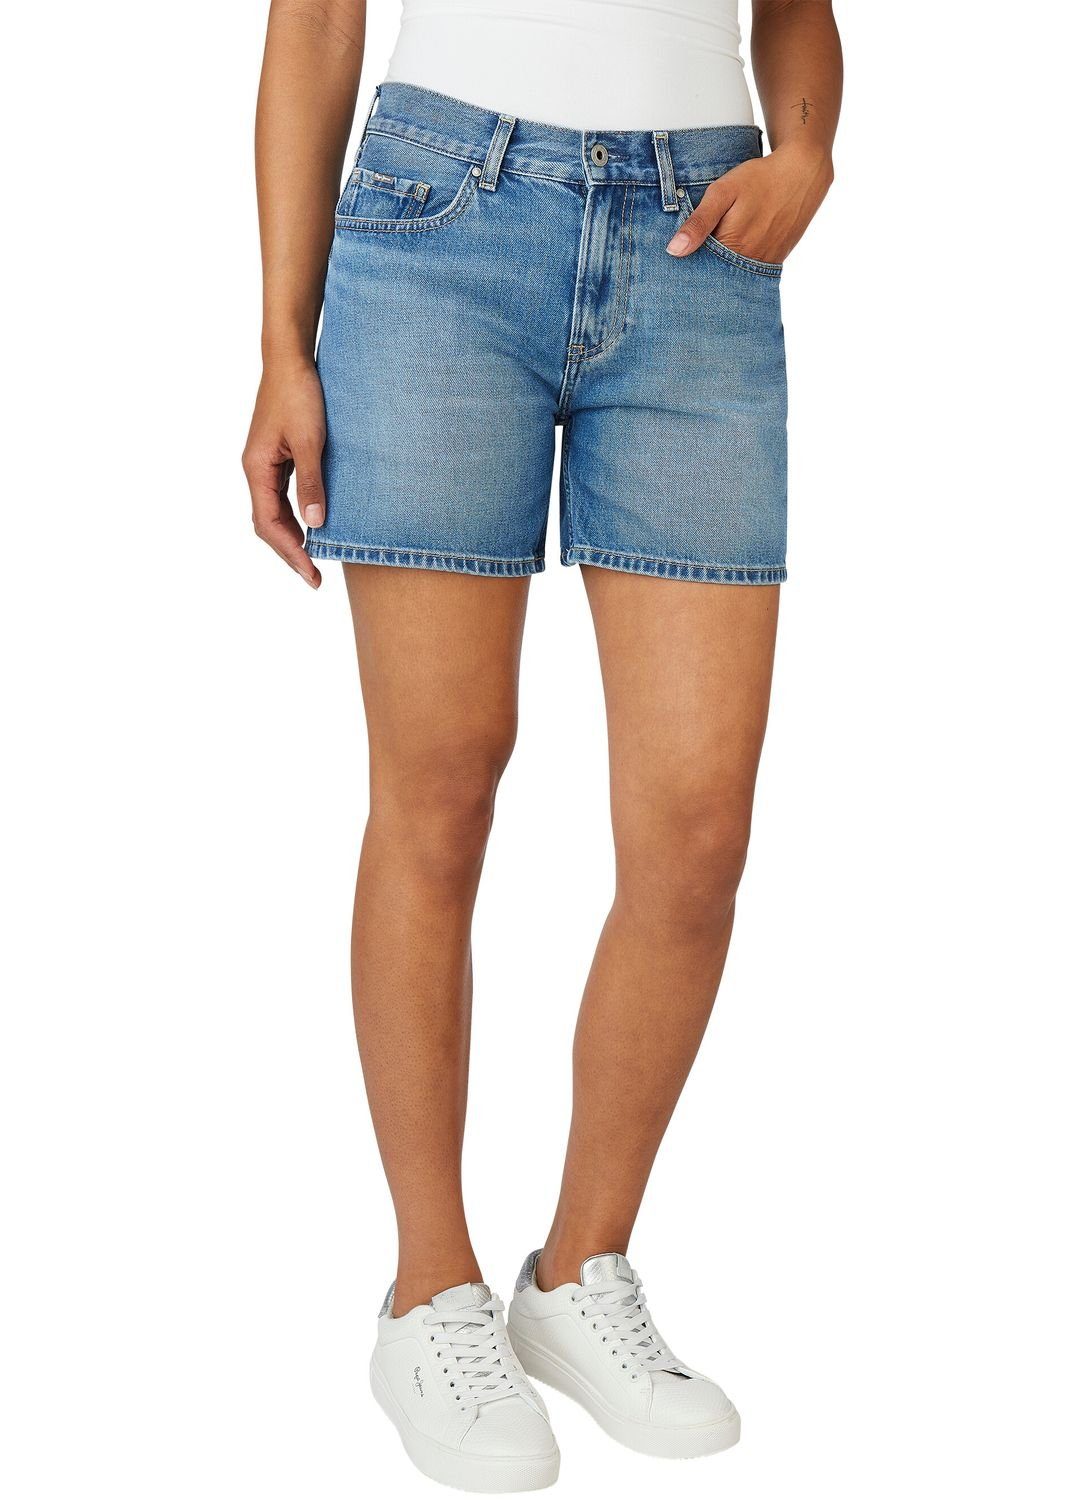 Jeansshorts Baumwolle MABLE aus Jeans Pepe